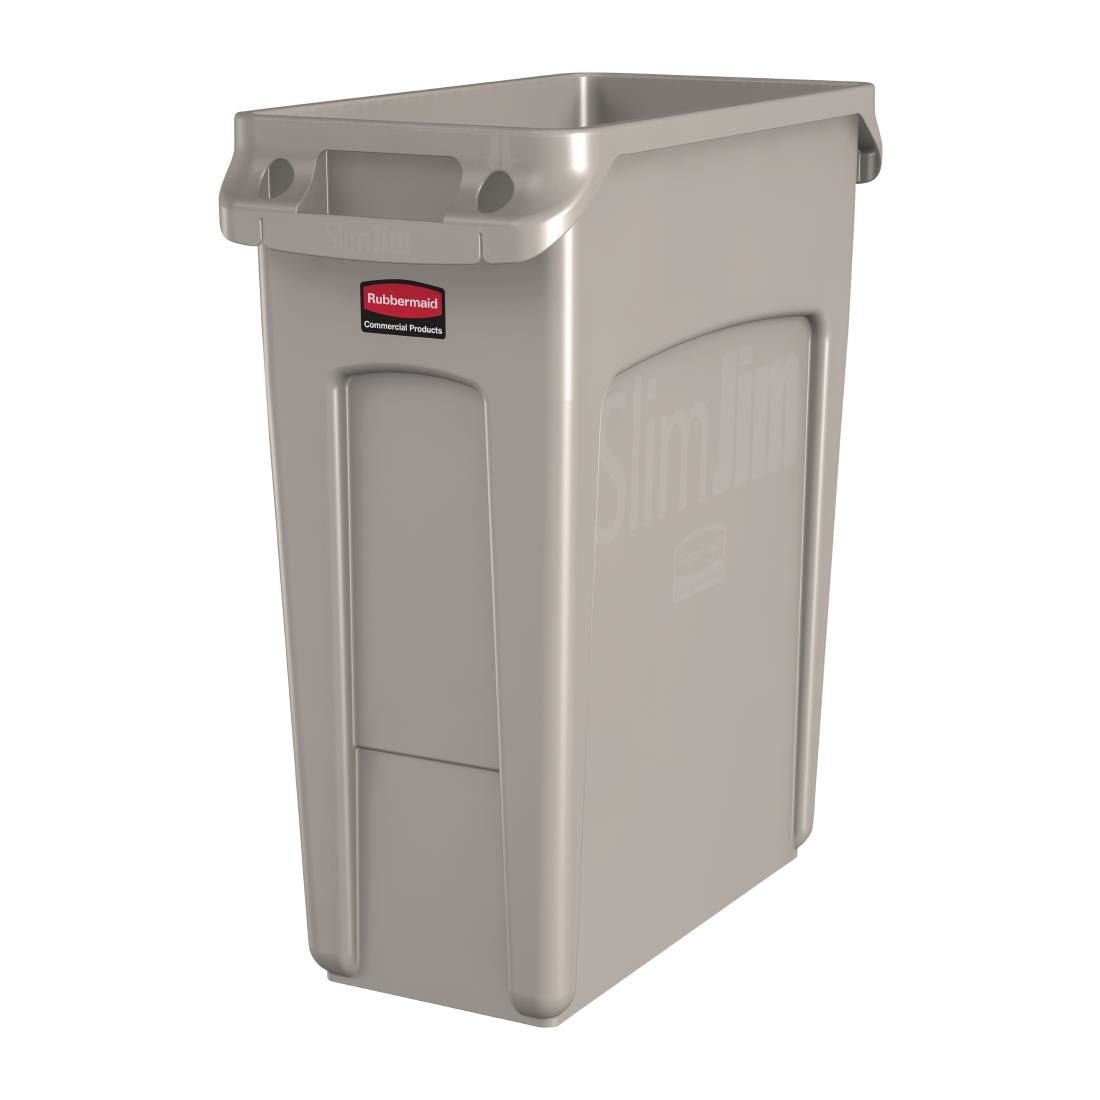 DY112 Rubbermaid Slim Jim Container With Venting Channels